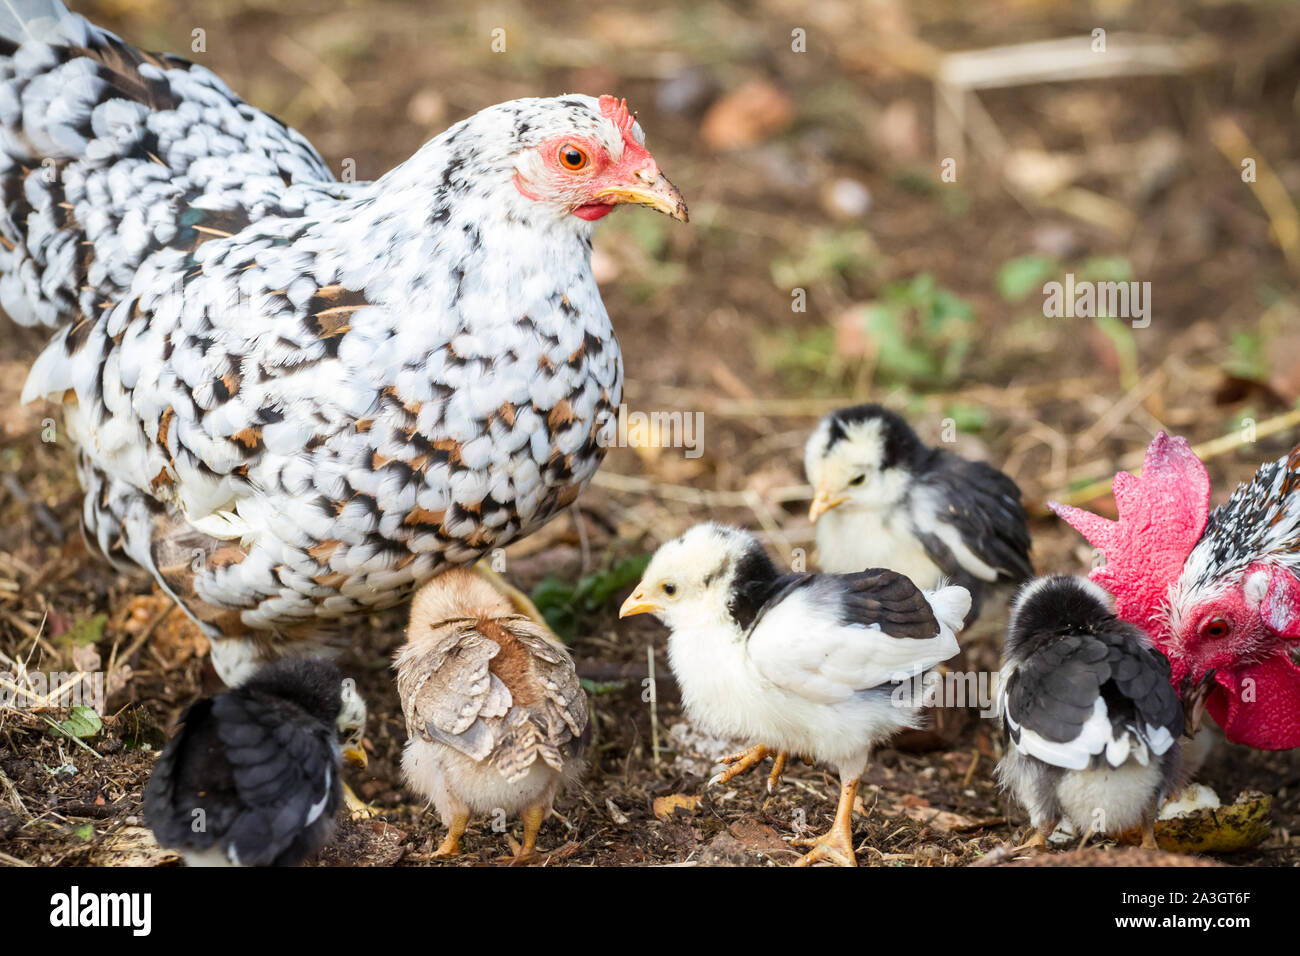 Mother hen and her fledglings - Stoapiperl / Steinhendl, an endangered chicken breed from Austria Stock Photo